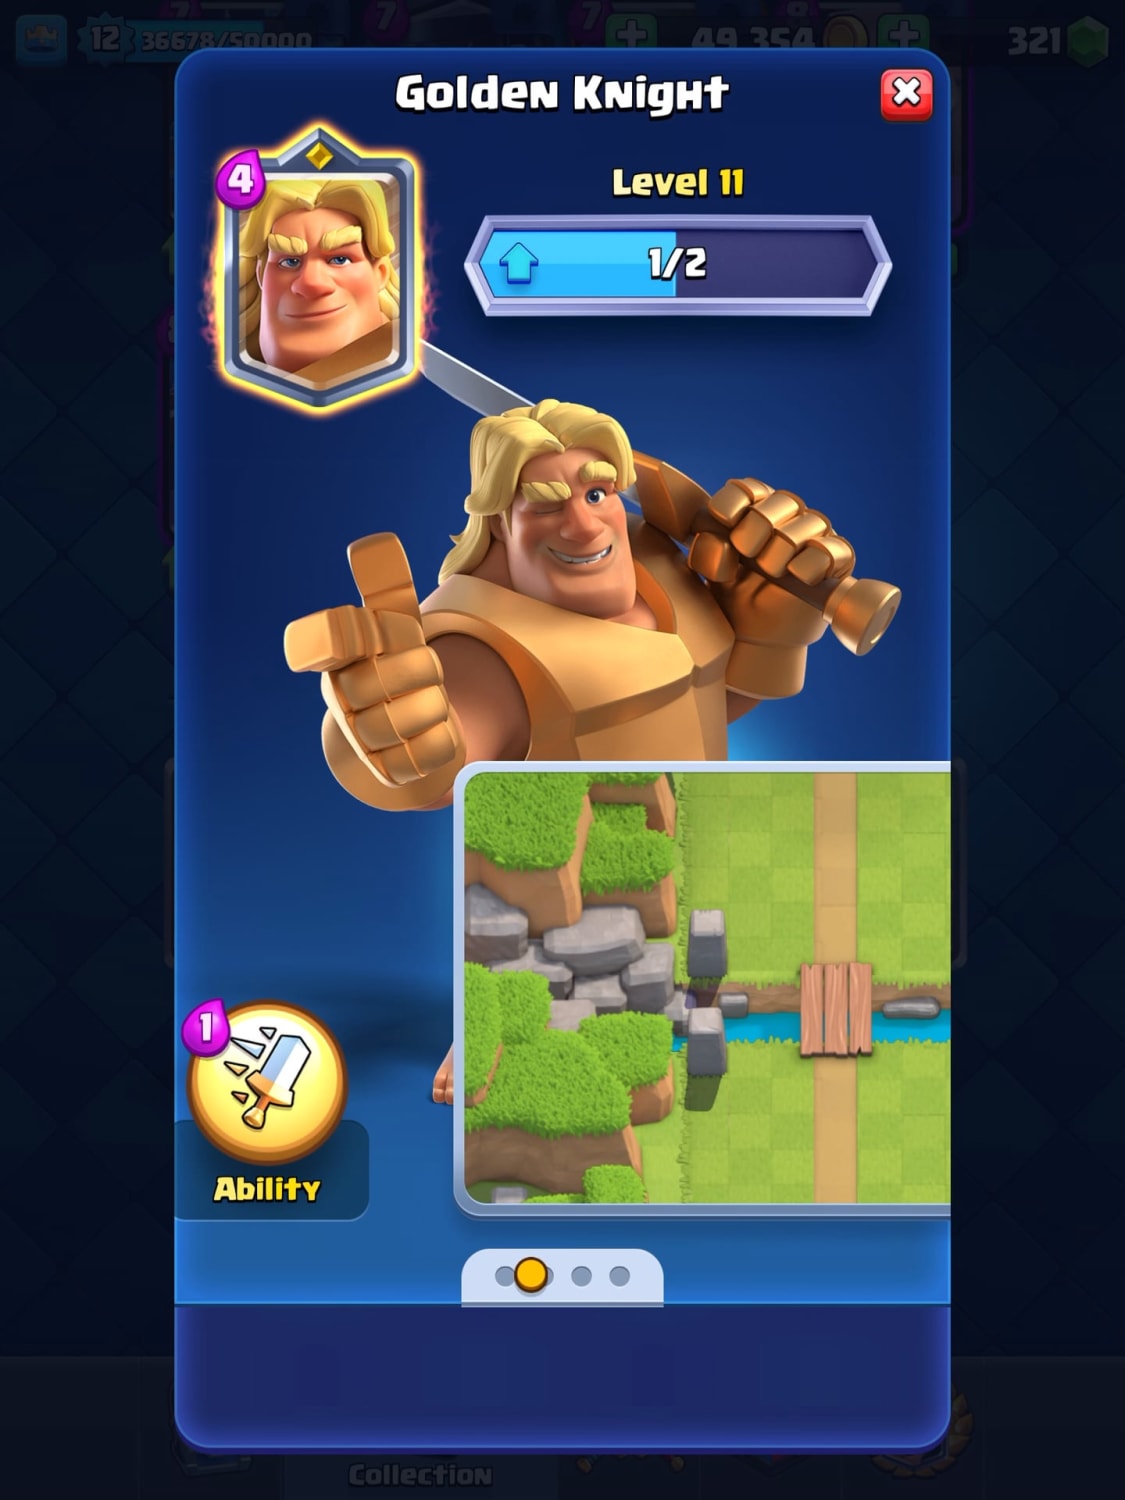 Idk if I’m the only one to notice this, but I think Supercell gotta change this 😅